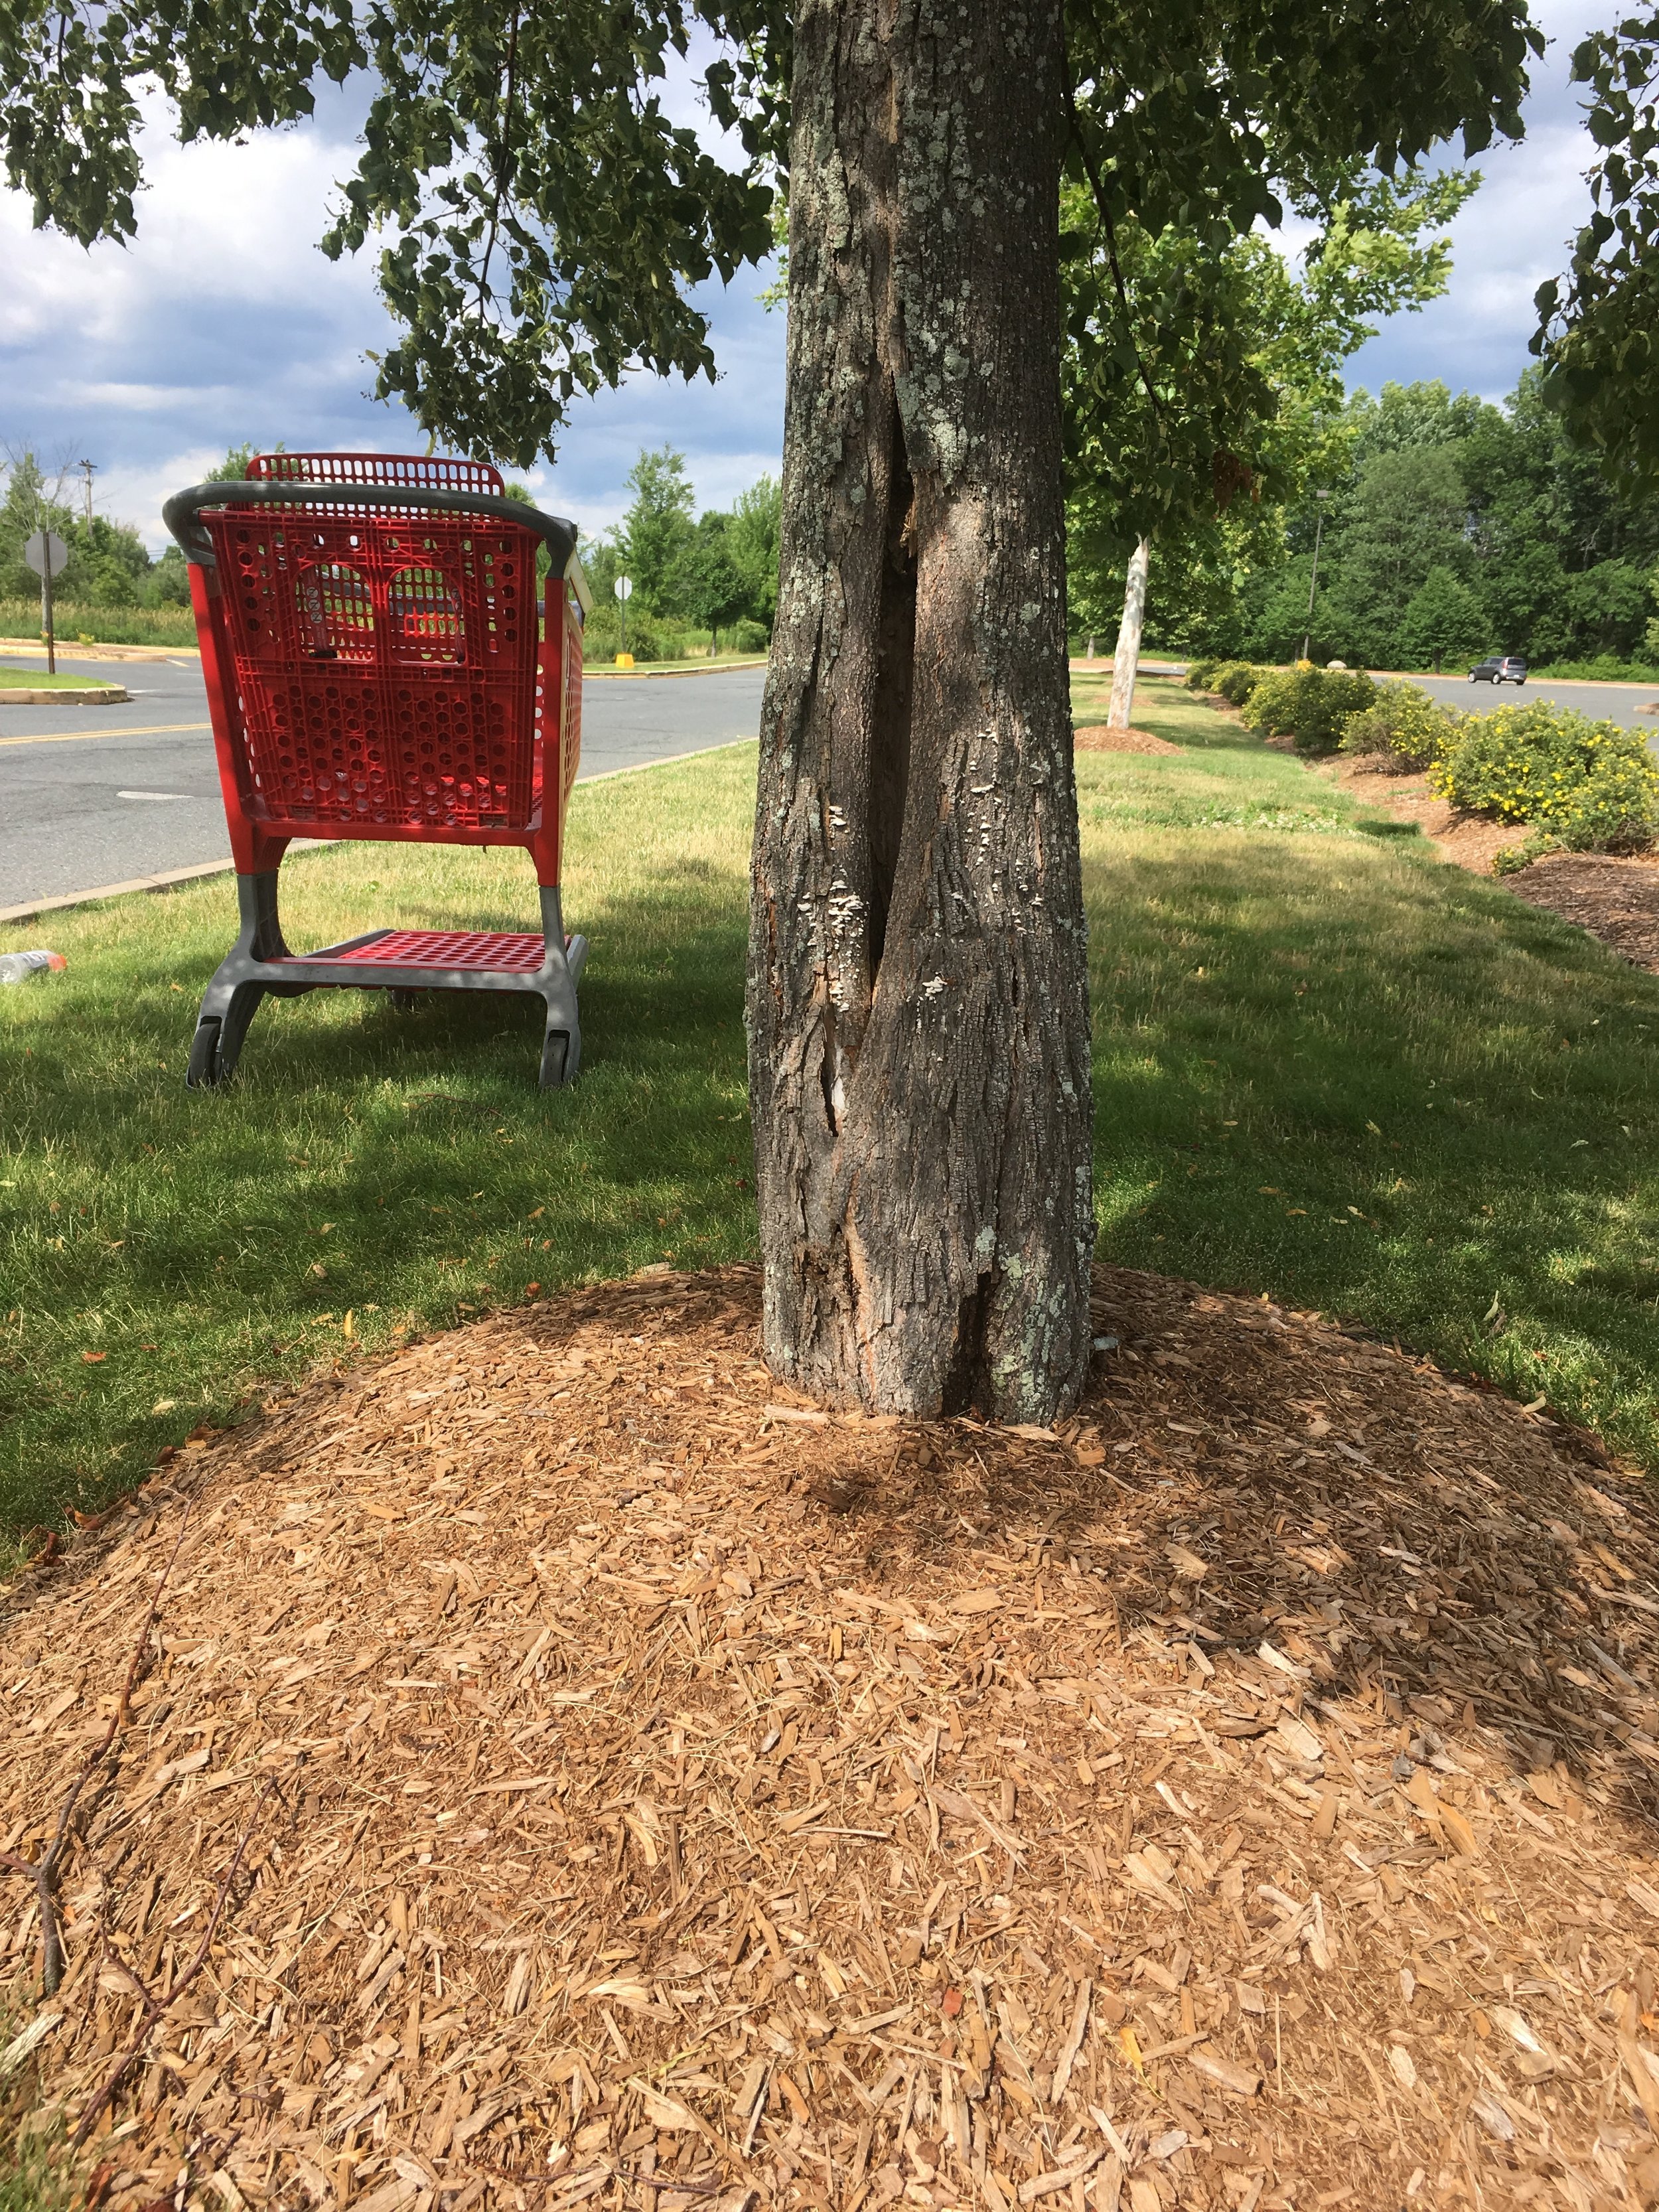 Volcano Mulch Spotted In Chico, Tall Tree Landscaping Belchertown